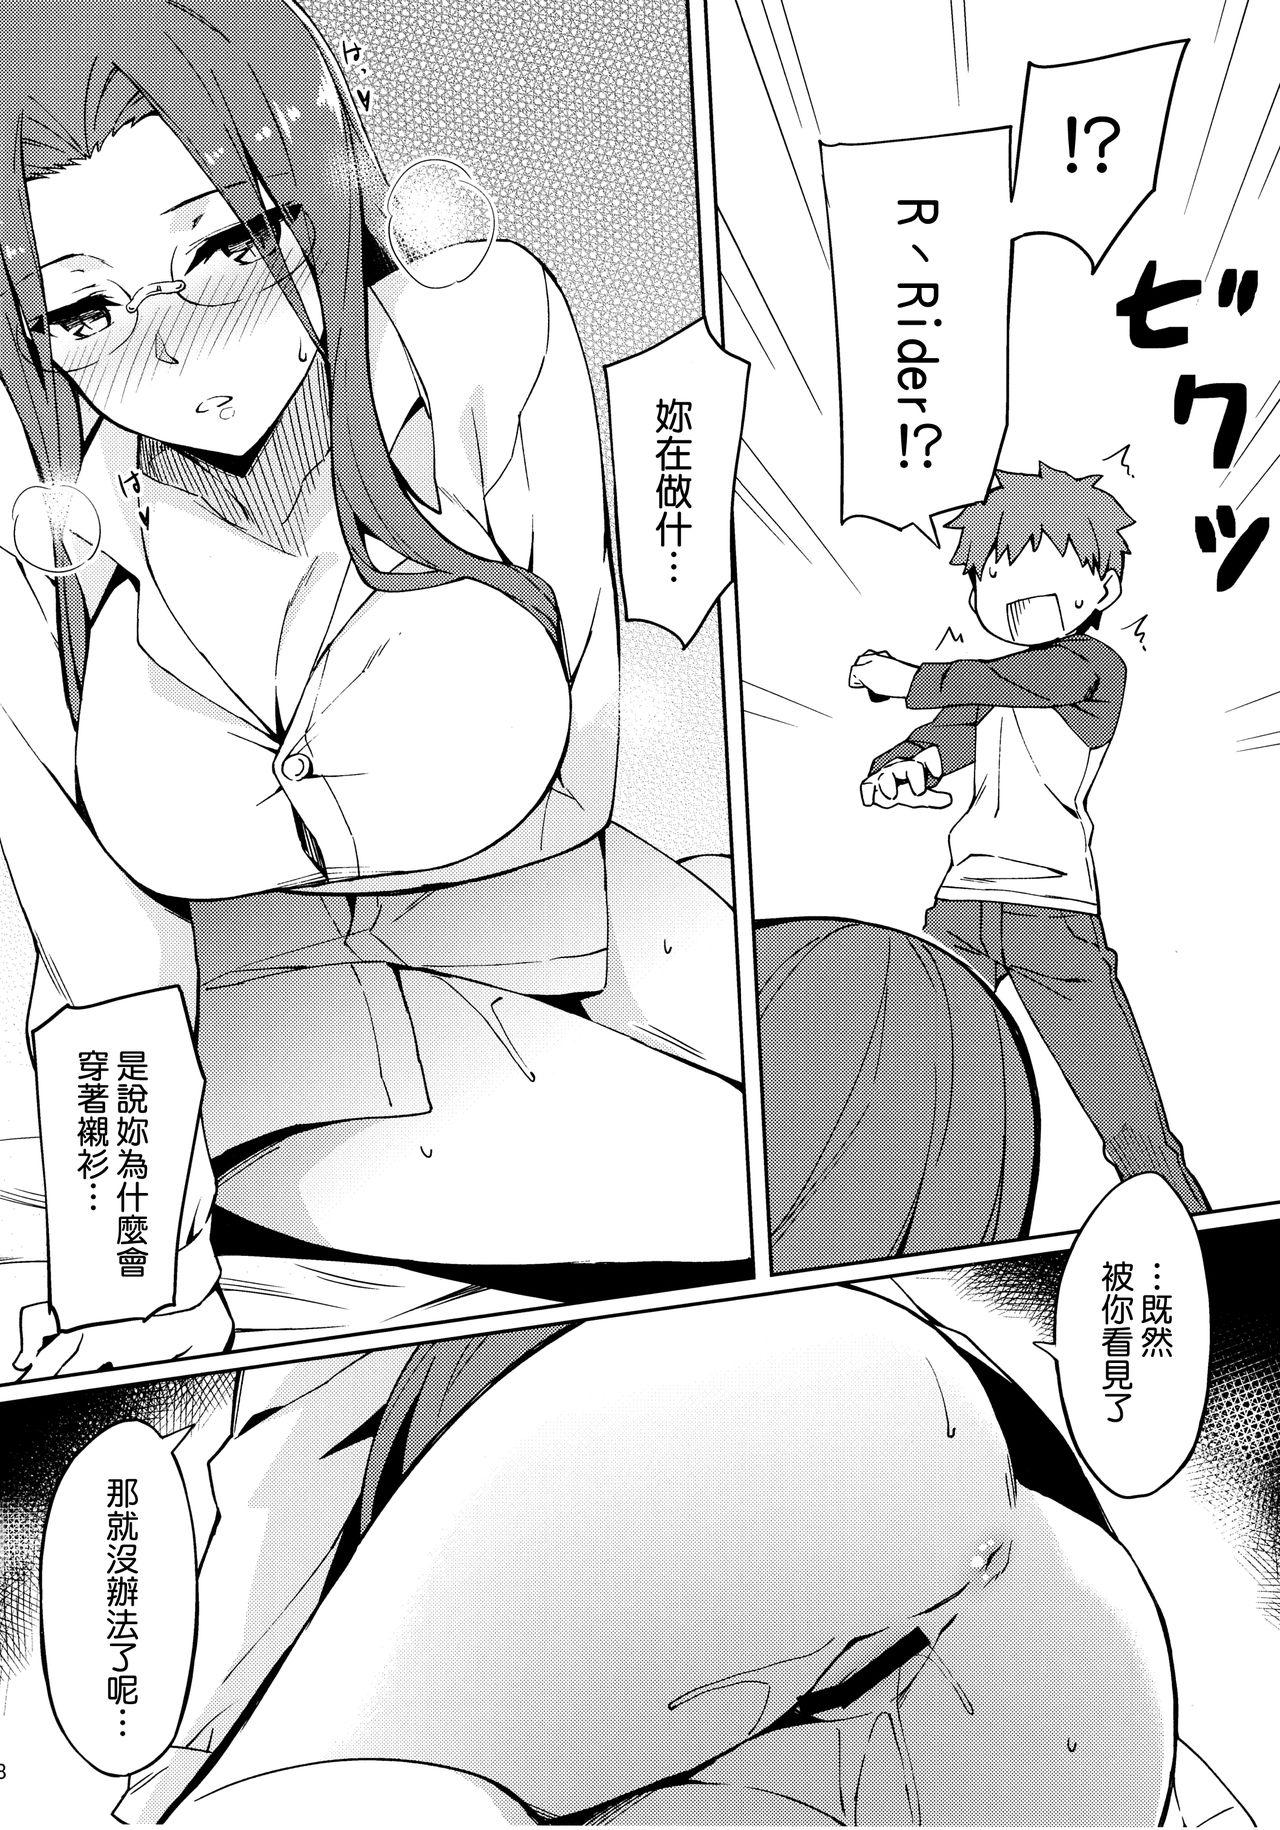 Piss Rider-san to Hadawai. - Fate stay night Swinger - Page 10